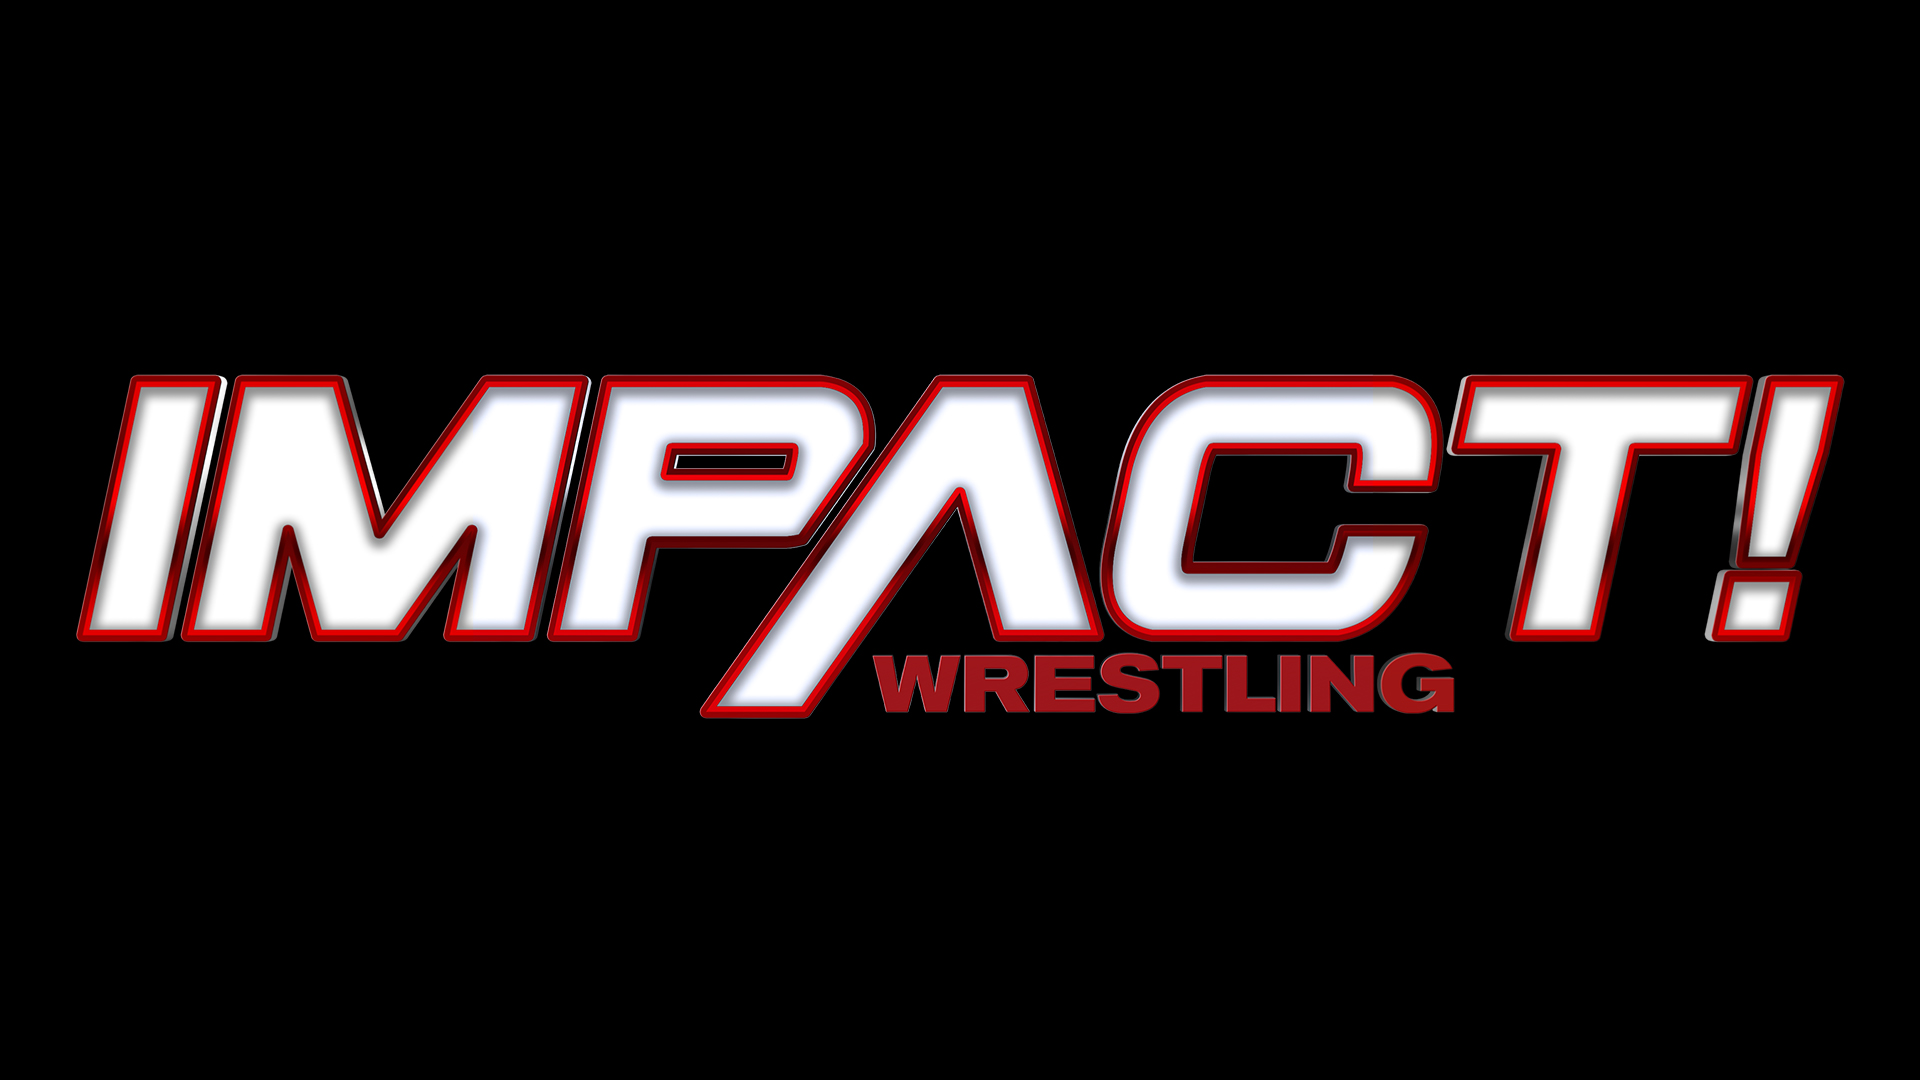 Top stars finish with impact tonight, important impact DVR note for viewers, more